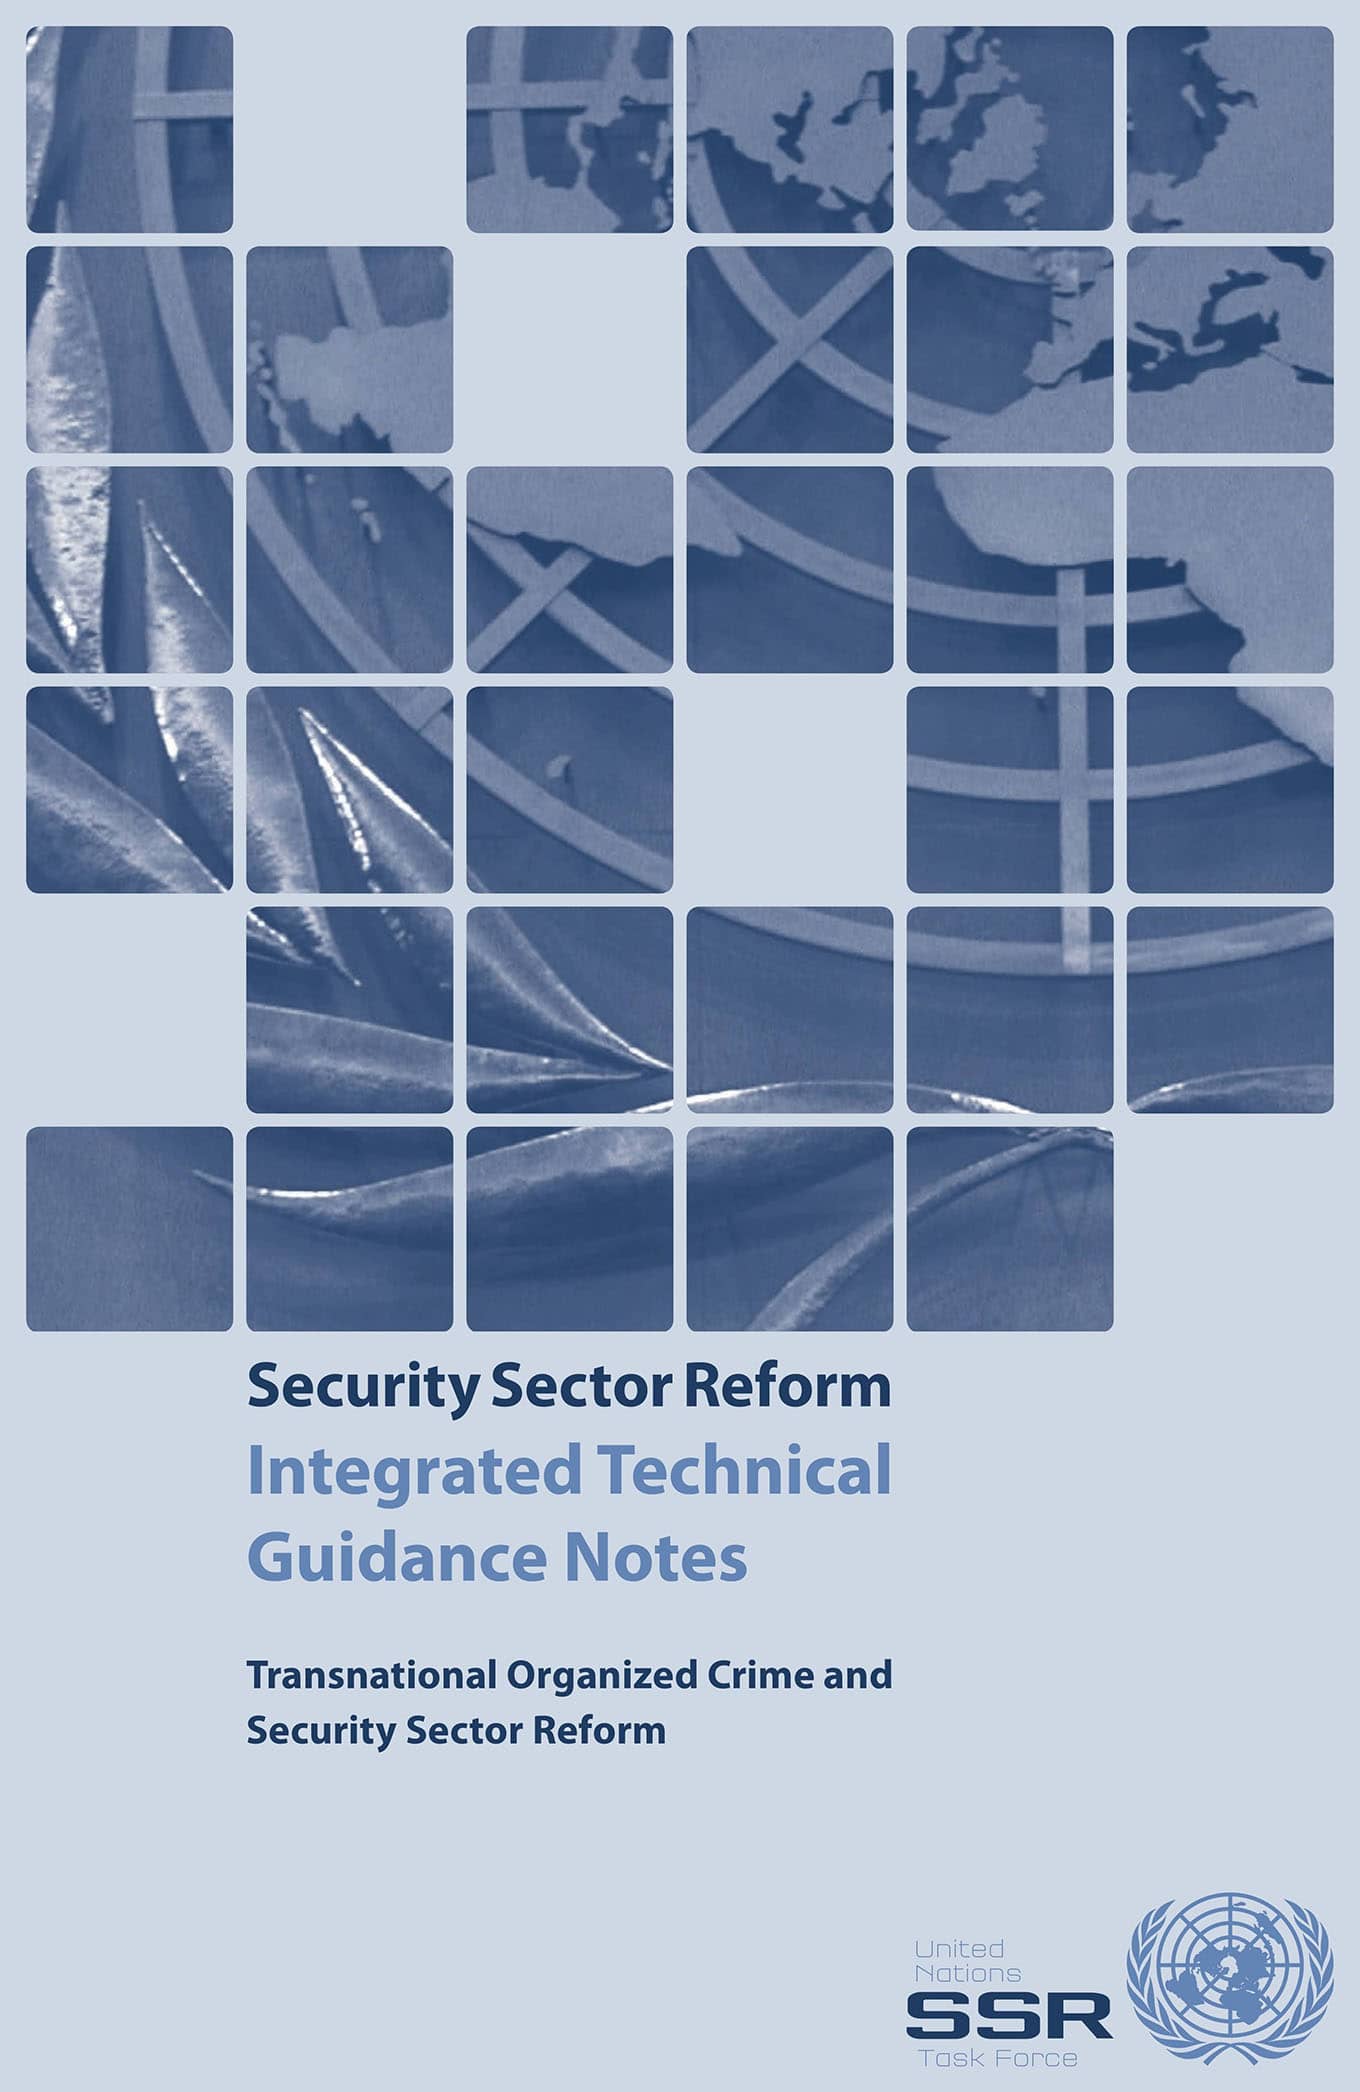 UN Security Sector Reform Intergrated Technical Guidance Notes (ITGN, 2016)